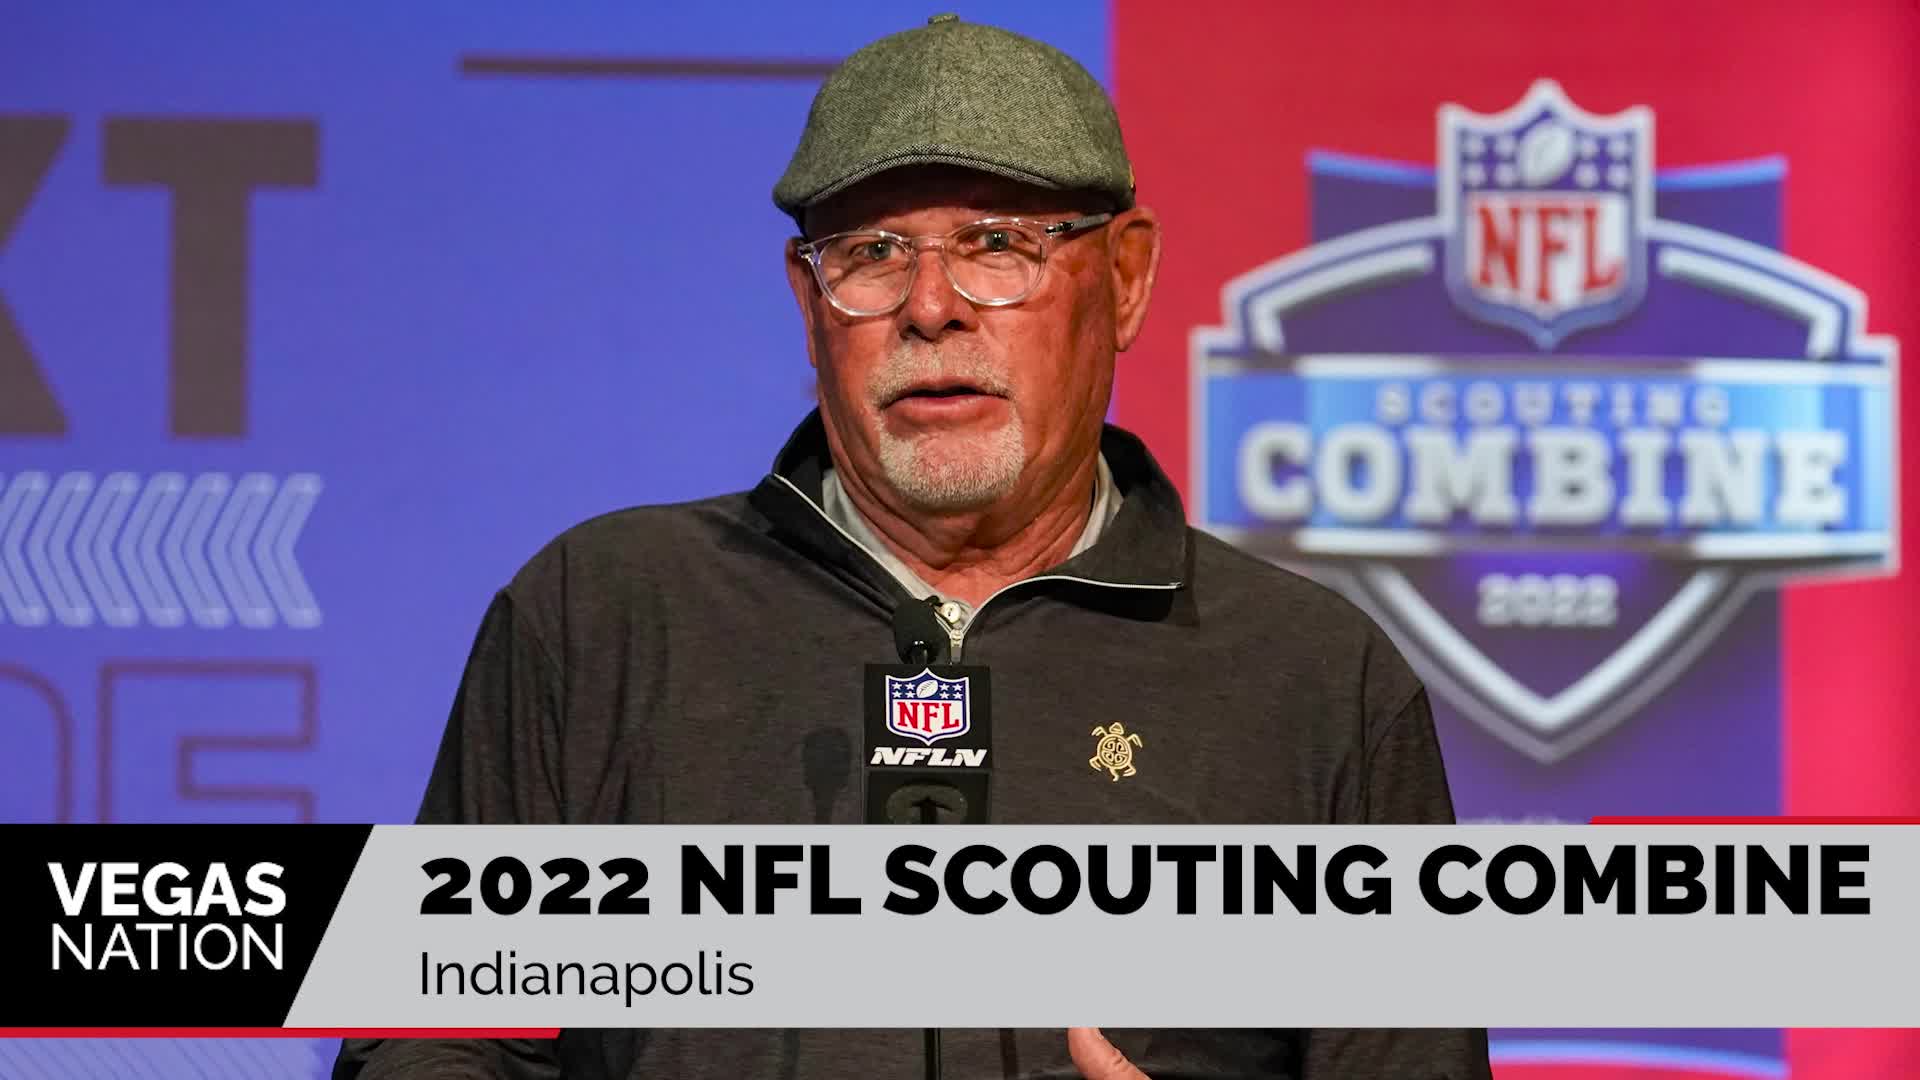 2022 NFL Combine officially kicks off